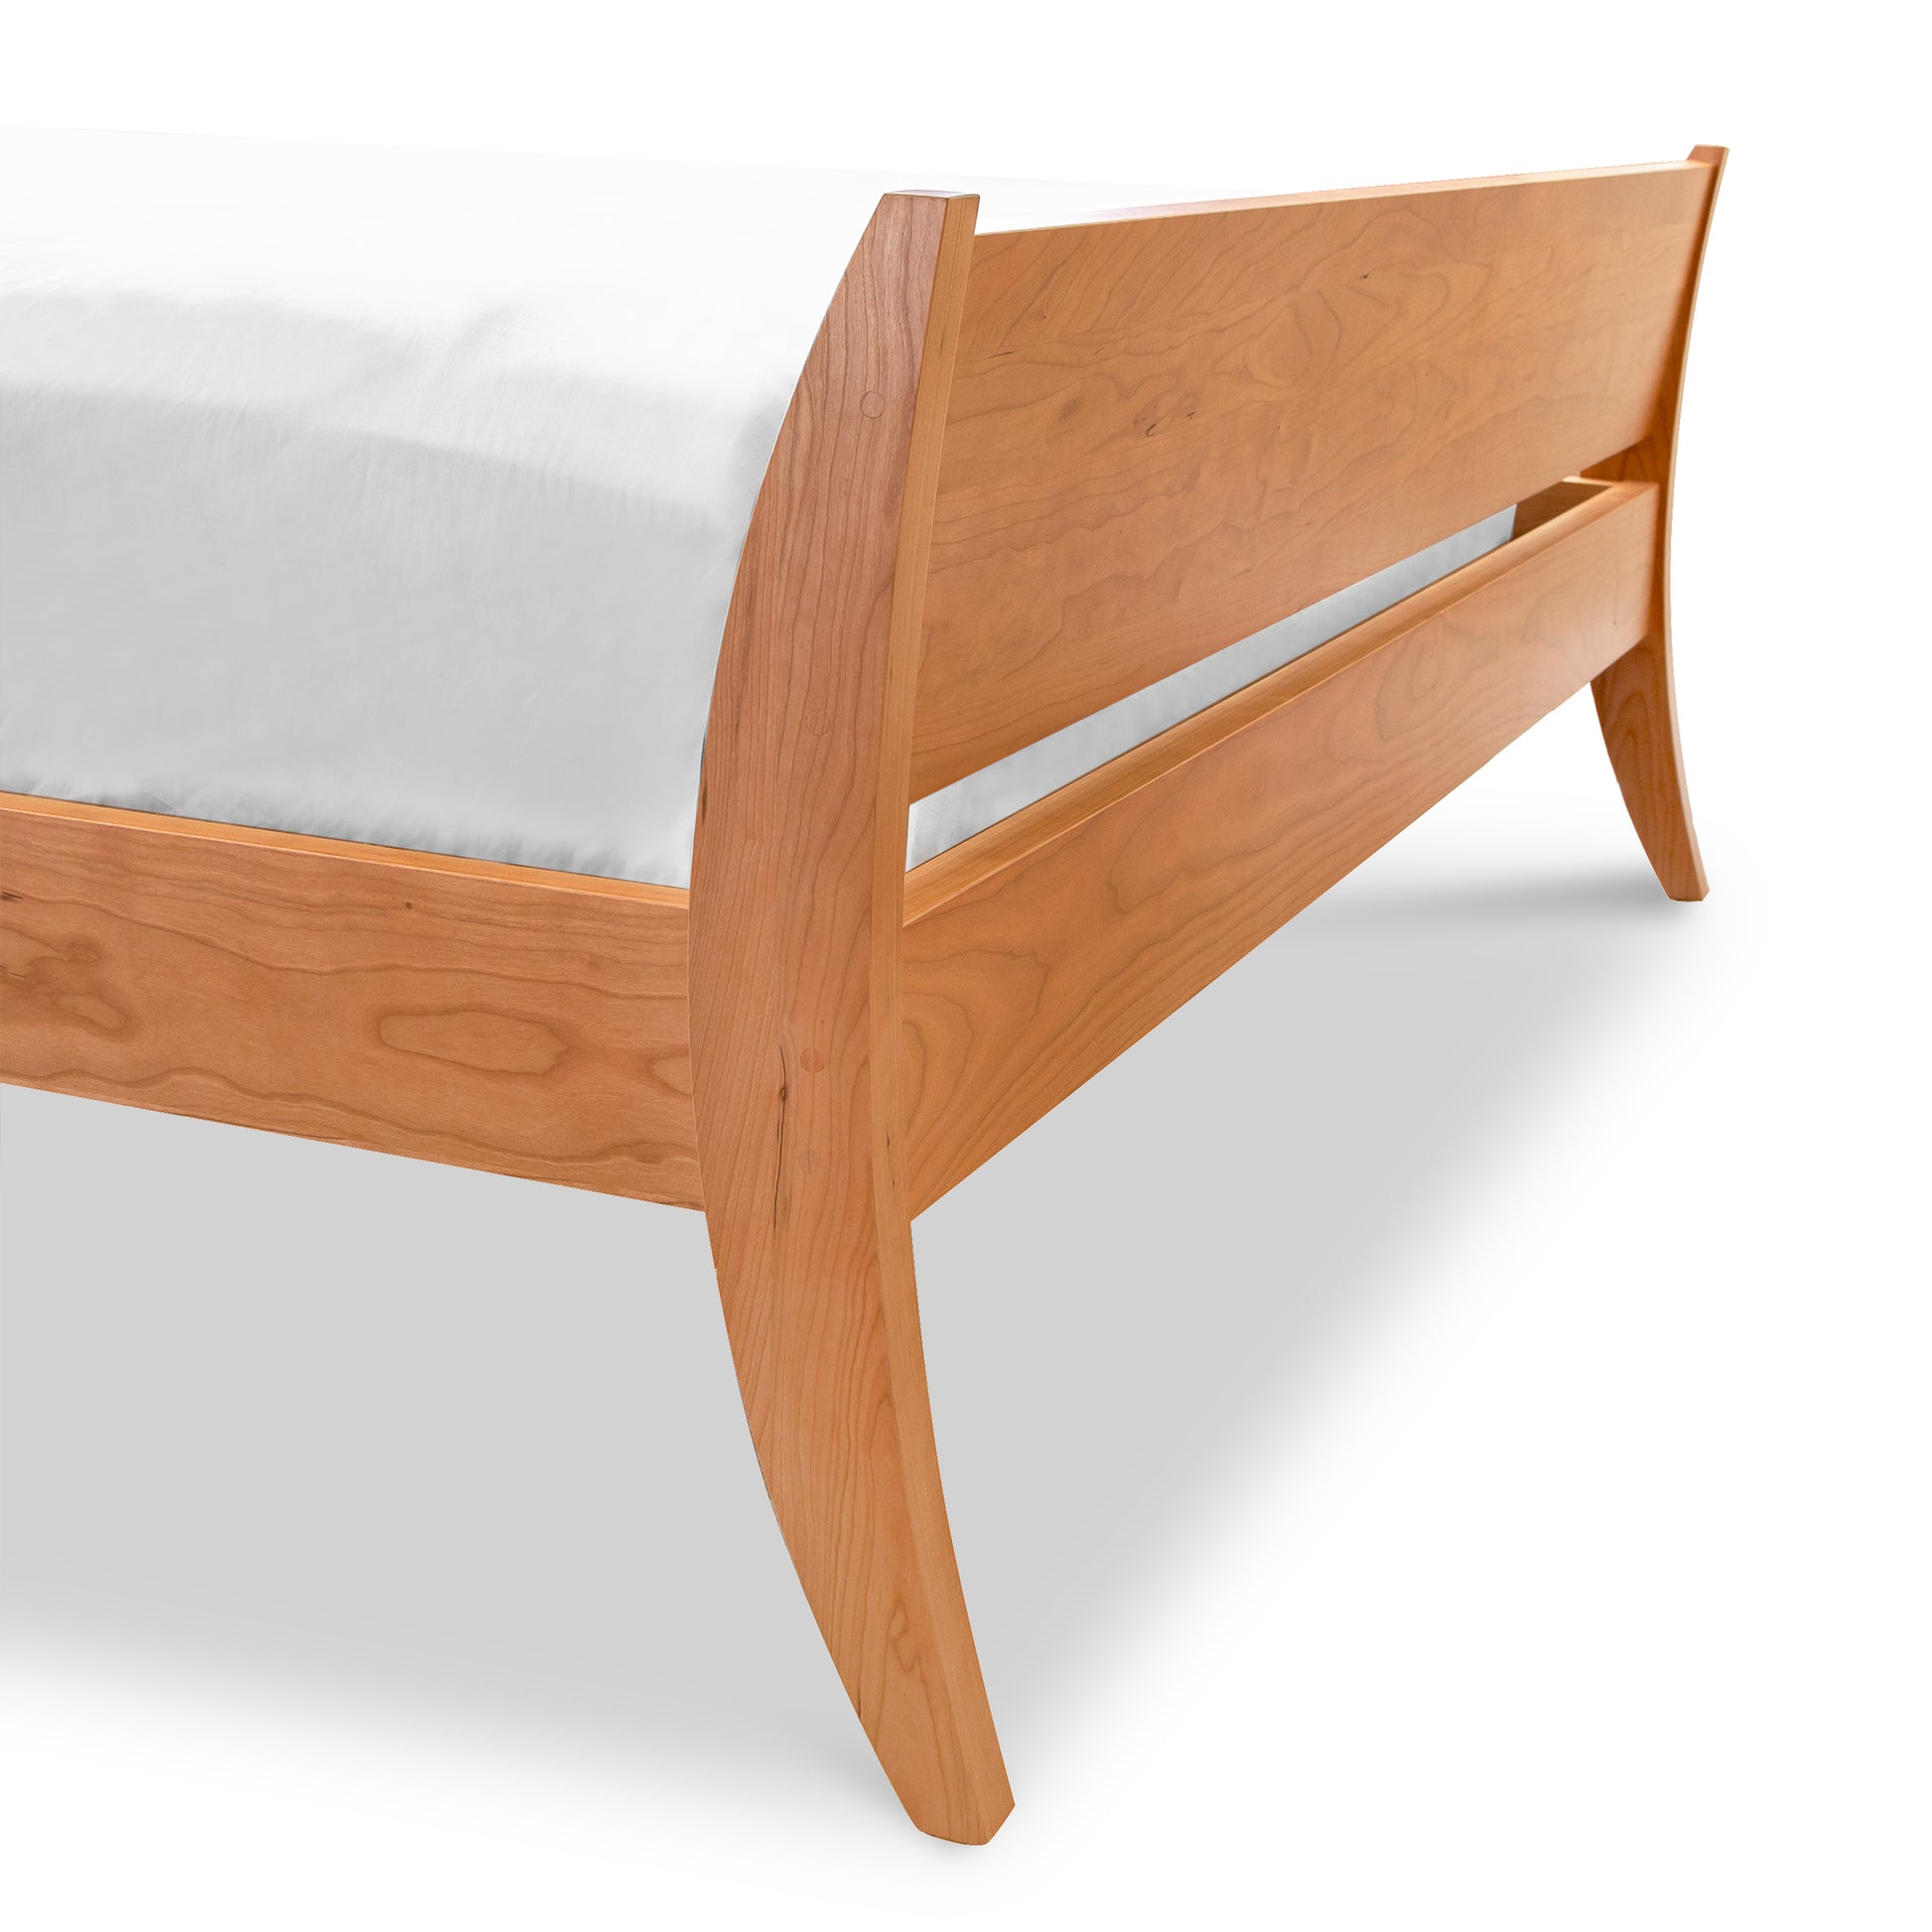 The Lyndon Furniture Holland Sleigh Bed is an elegant bedroom centerpiece that combines a contemporary twist with a wooden bed frame and a white sheet.